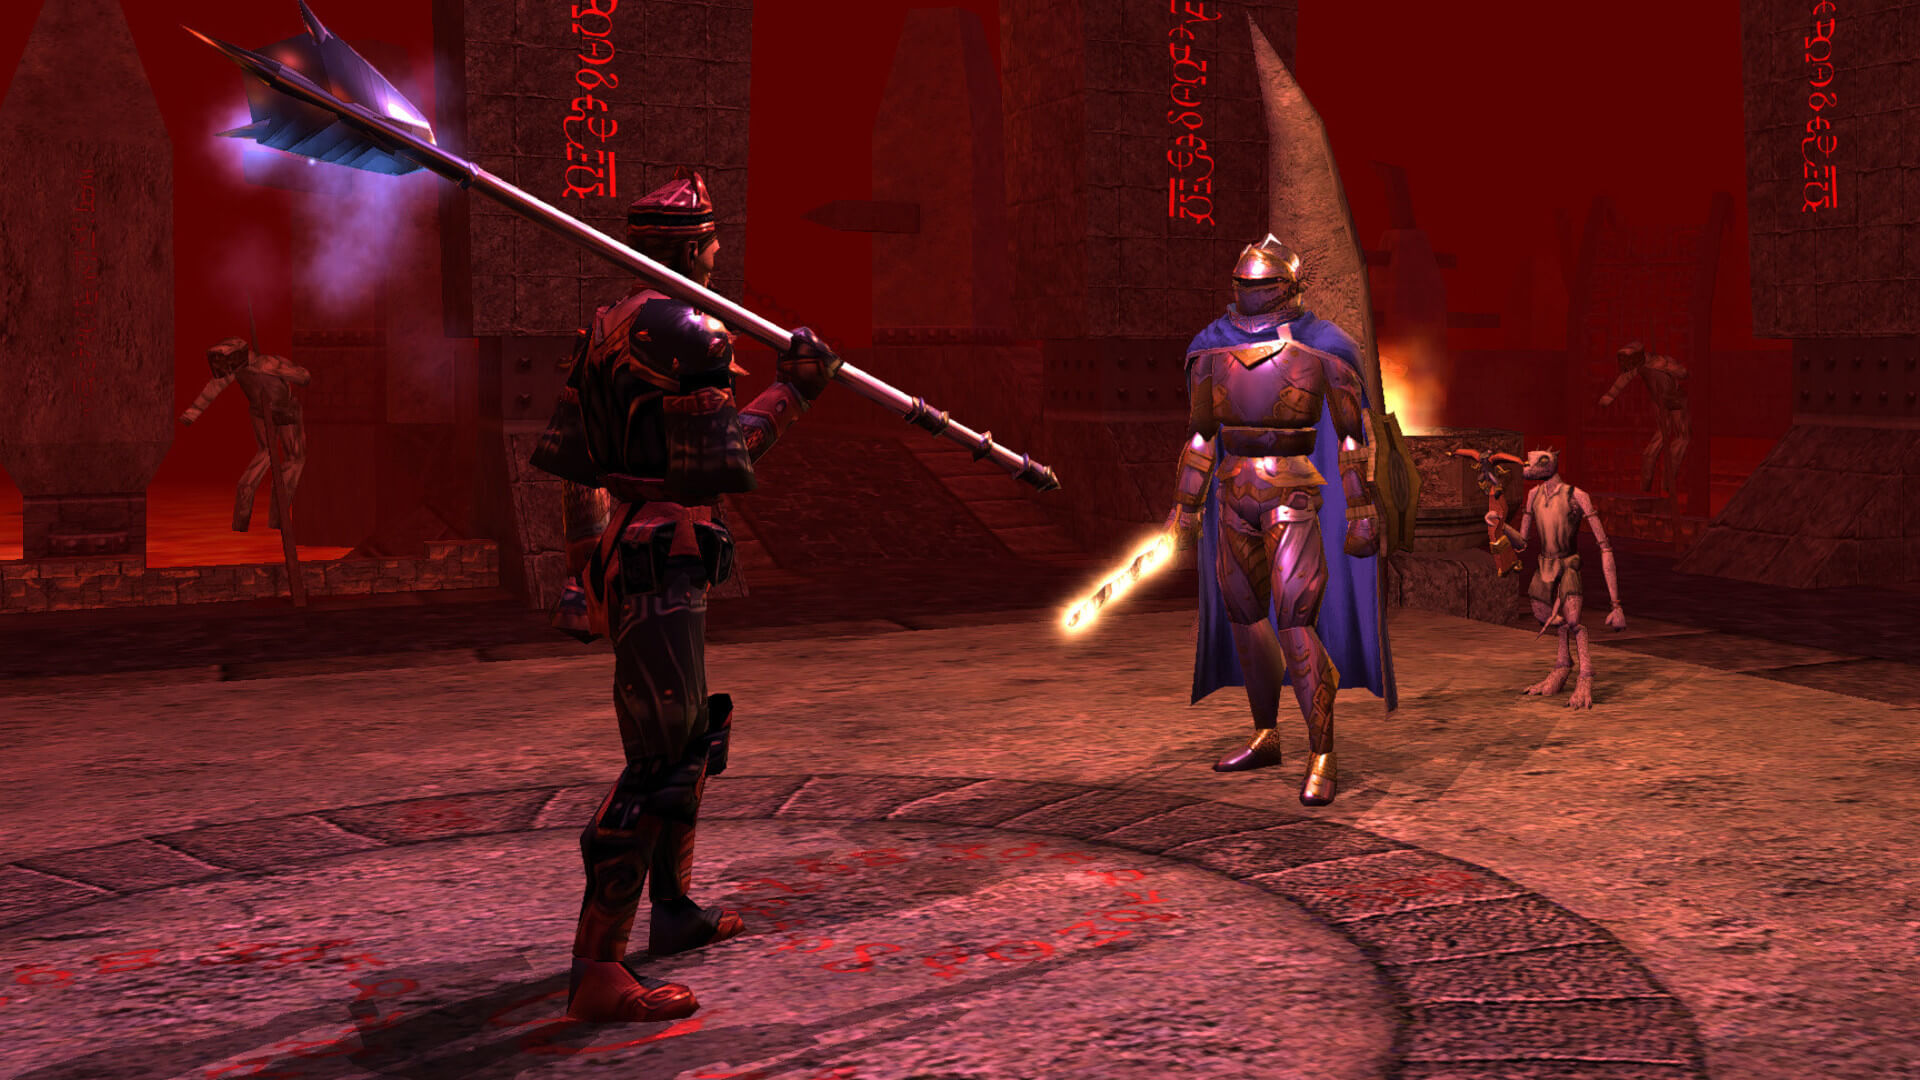 Two characters standing in a distinctly evil-looking location in Neverwinter Nights, which was originally published by Infogrames